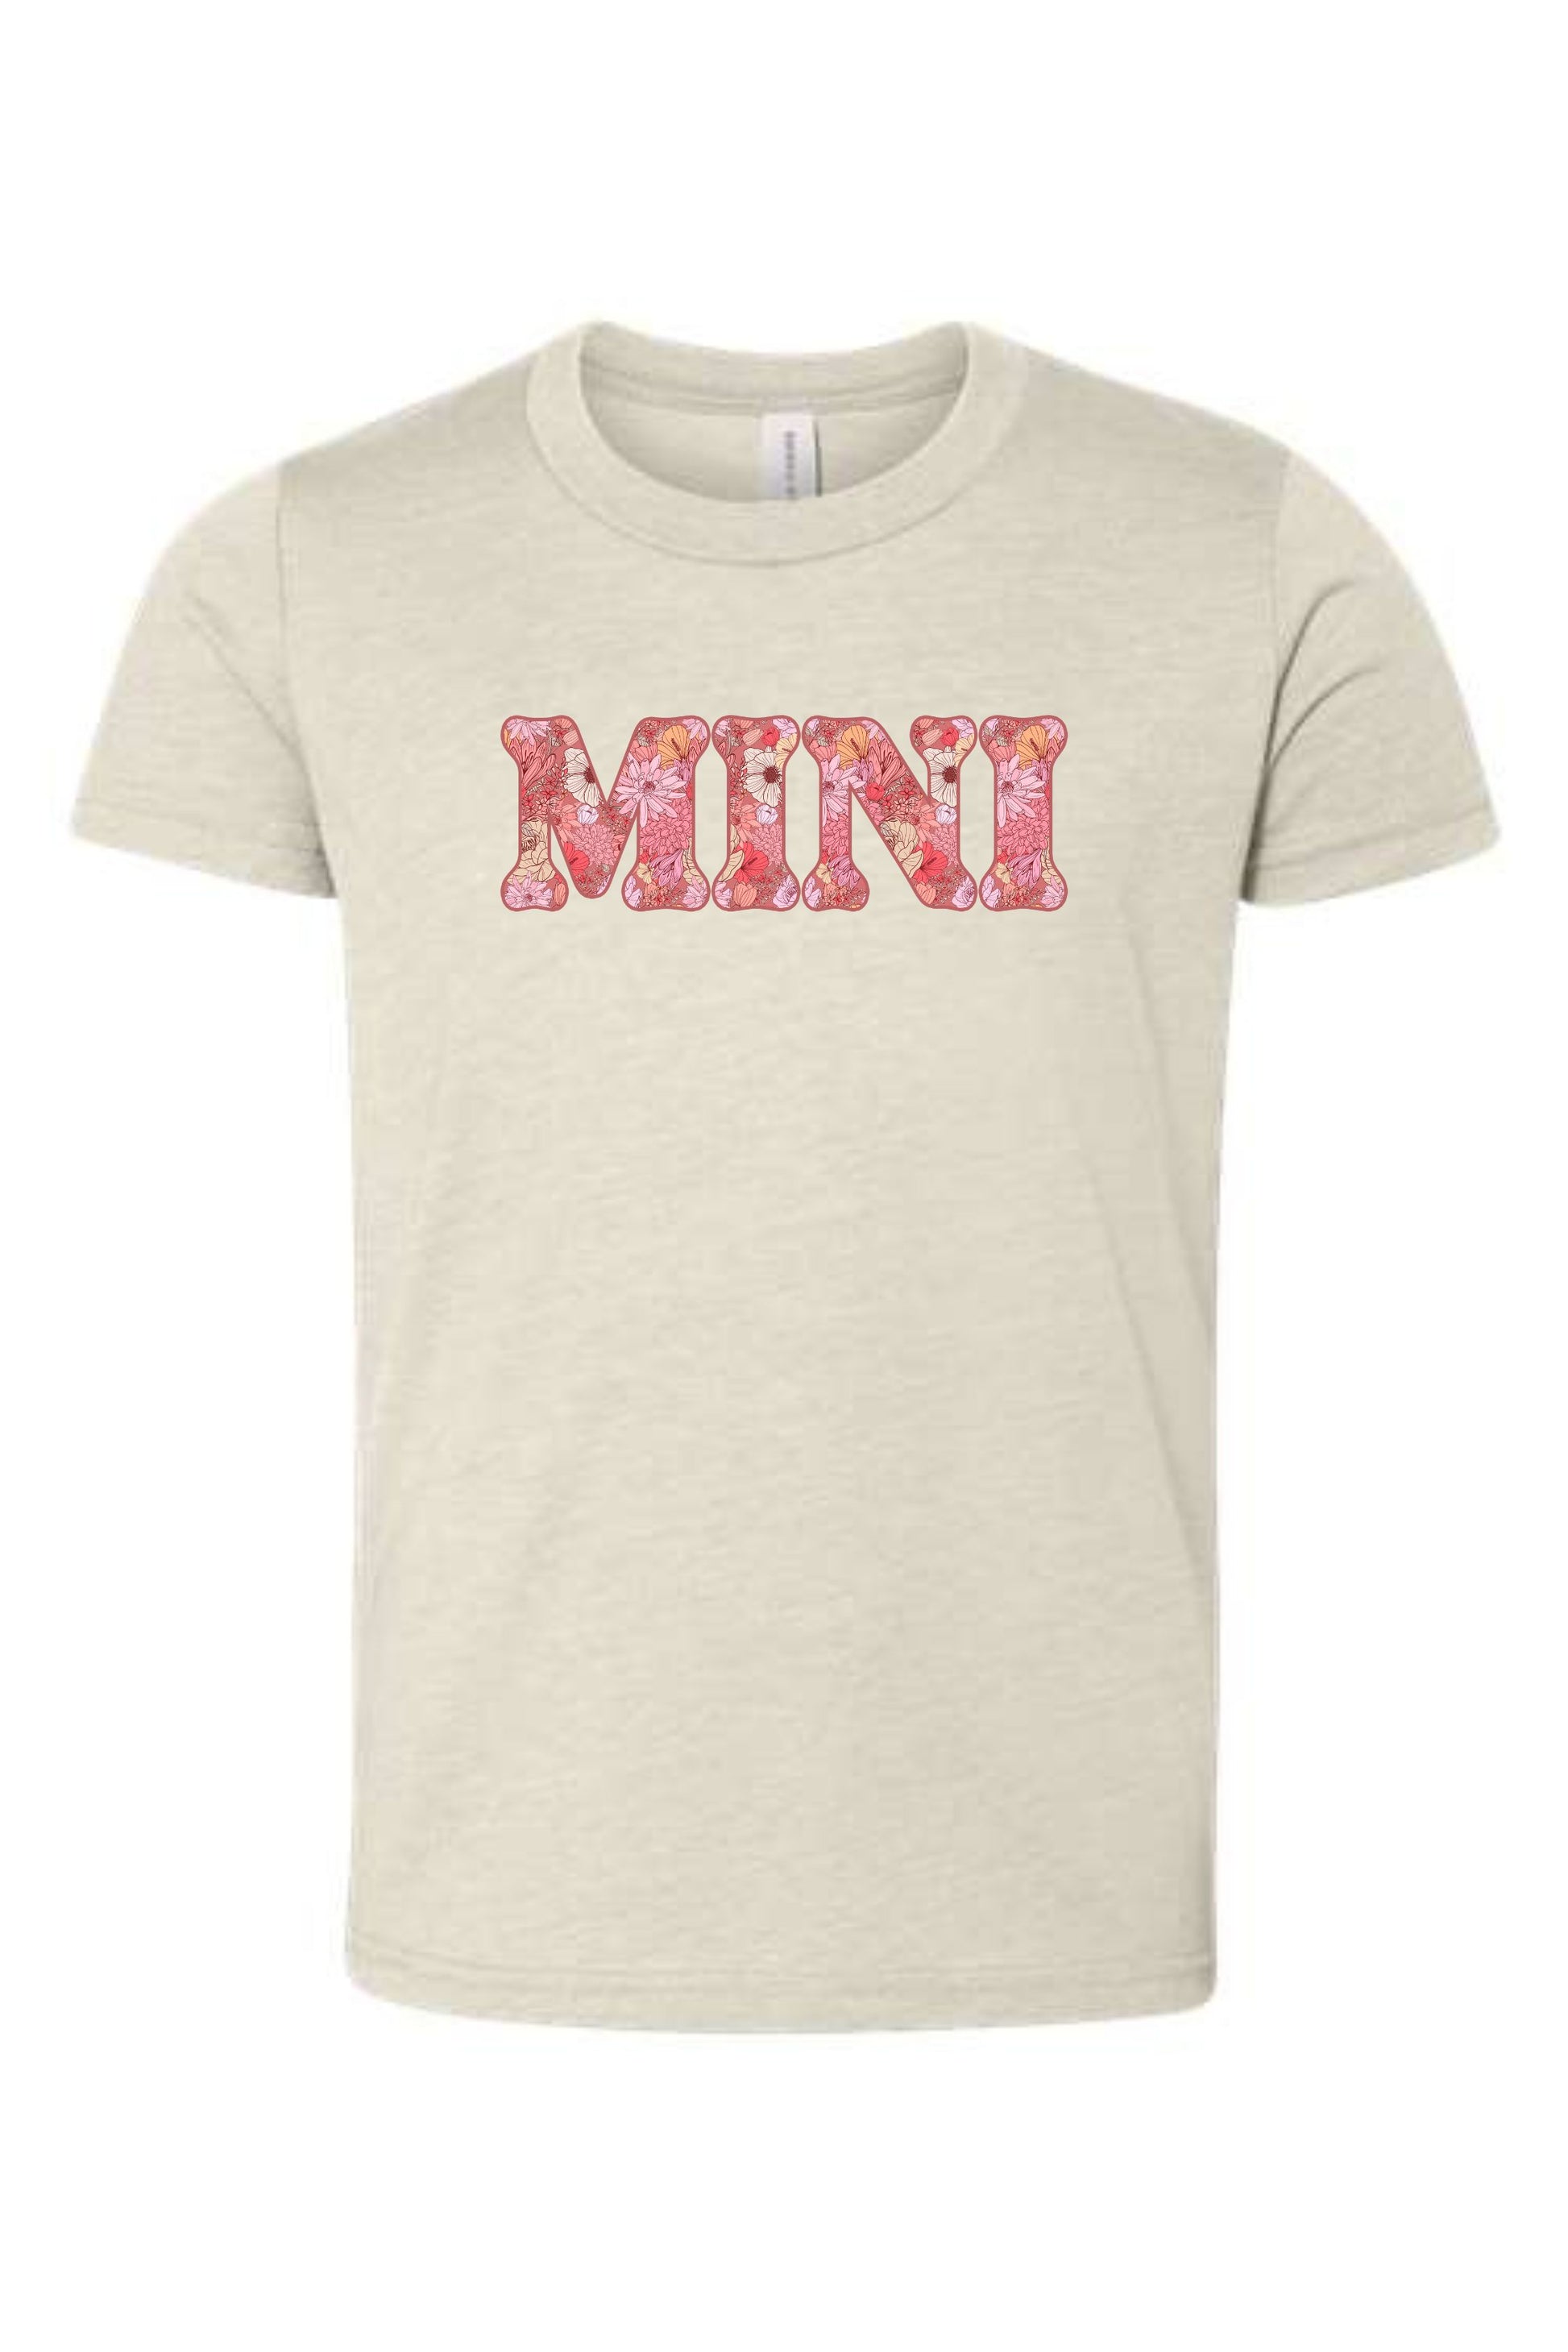 Floral Mini | Kids Tee-Kids Tees-Sister Shirts-Sister Shirts, Cute & Custom Tees for Mama & Littles in Trussville, Alabama.